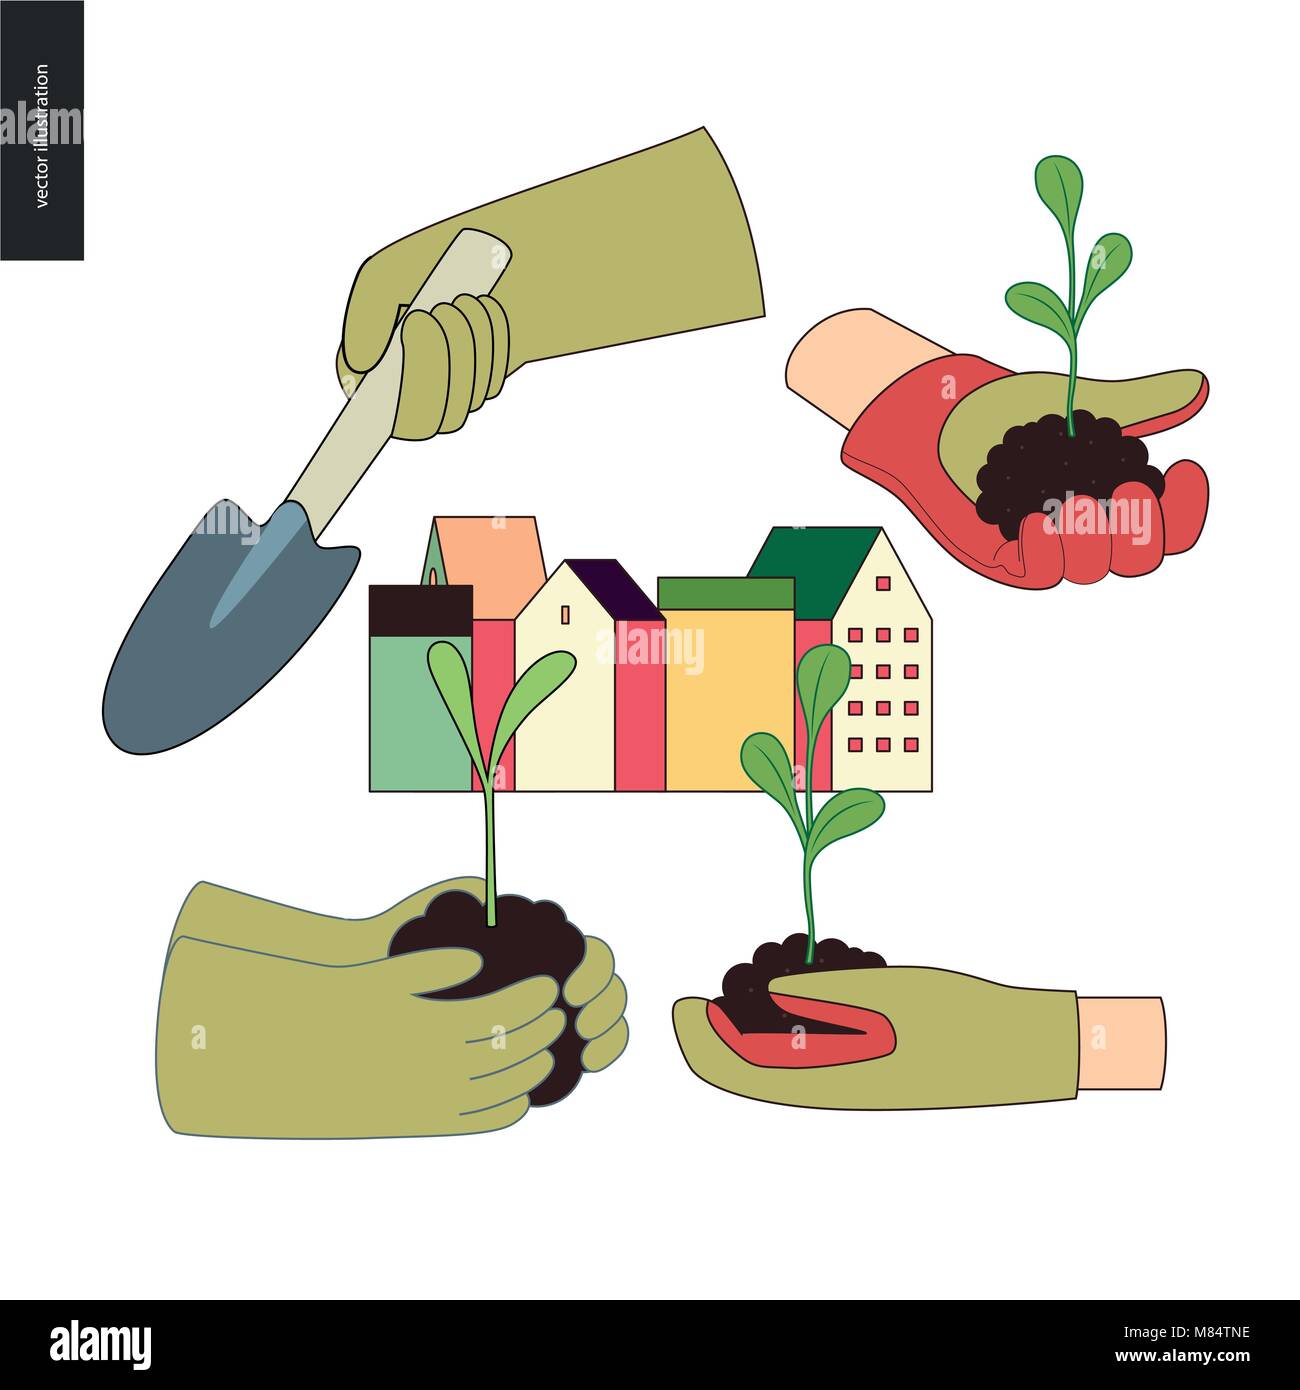 Urban farming, gardening or agriculture. Set of hands wearing the gauntlet holding sprouts and a scoop, and a block of town houses Stock Vector